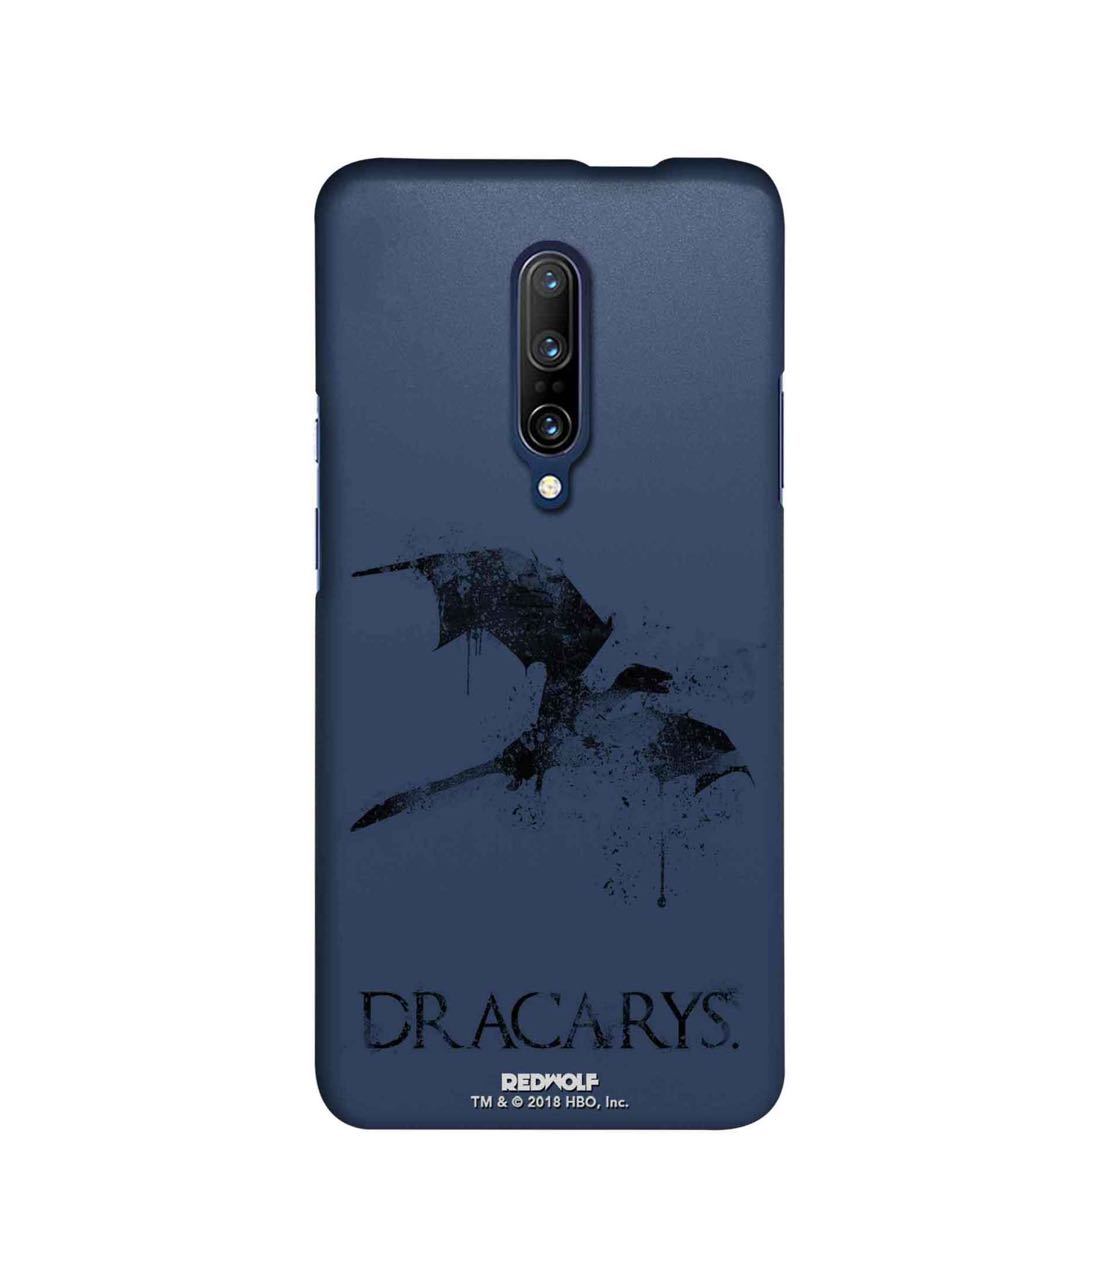 Dracarys  - Sublime case for OnePlus 7 Pro